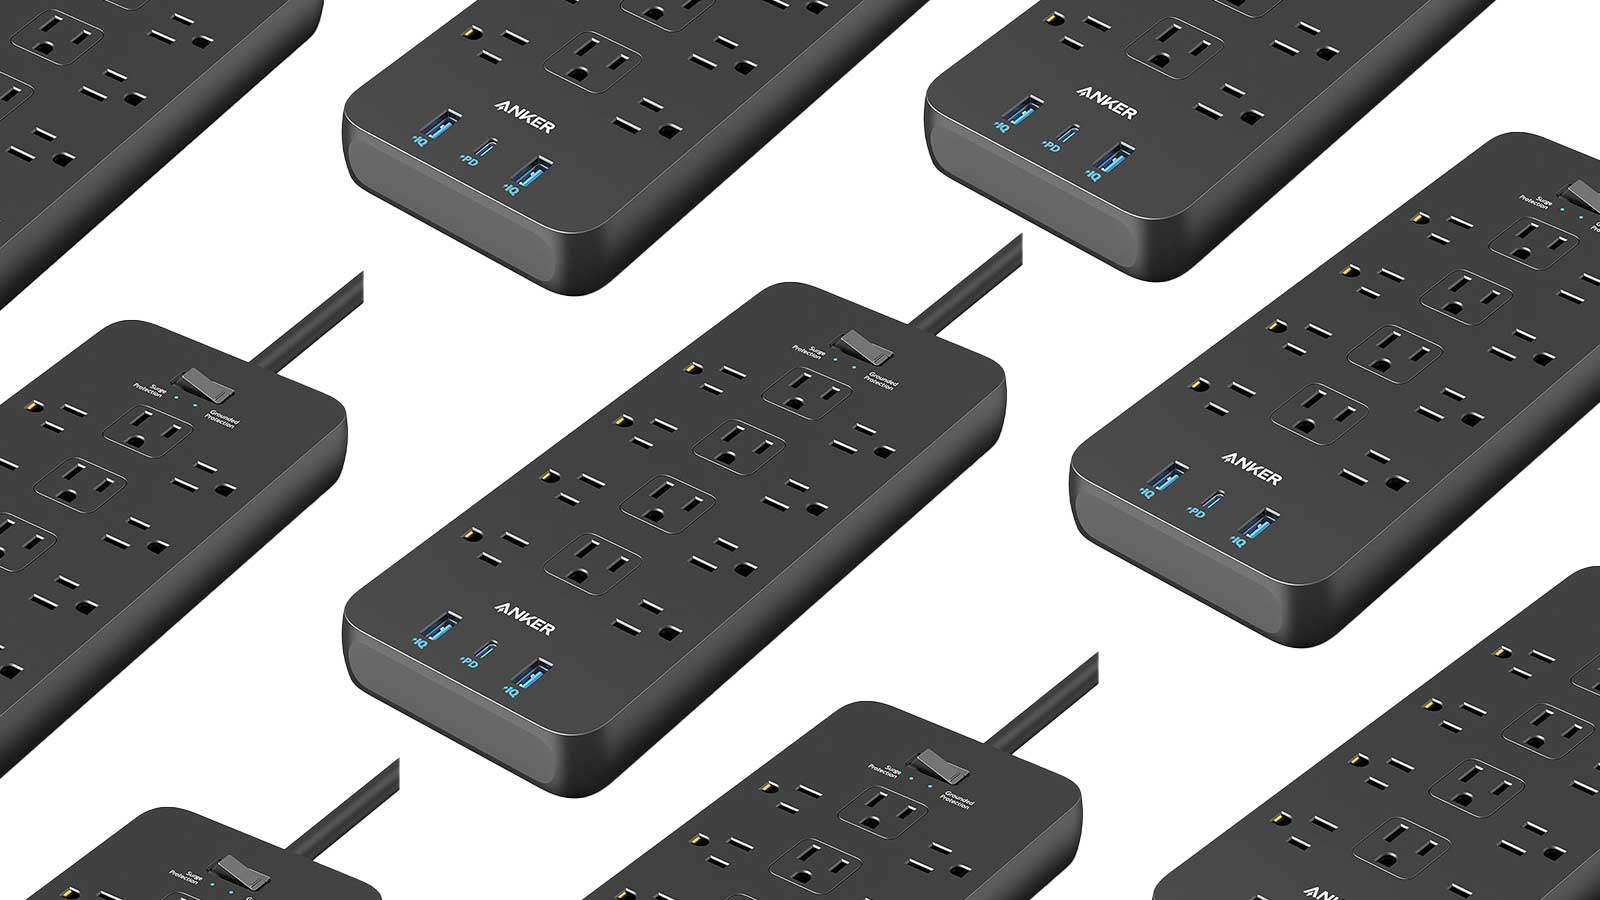 Save 40% on Anker surge protectors, USB-C docks, and other boring-but-essential PC accessories